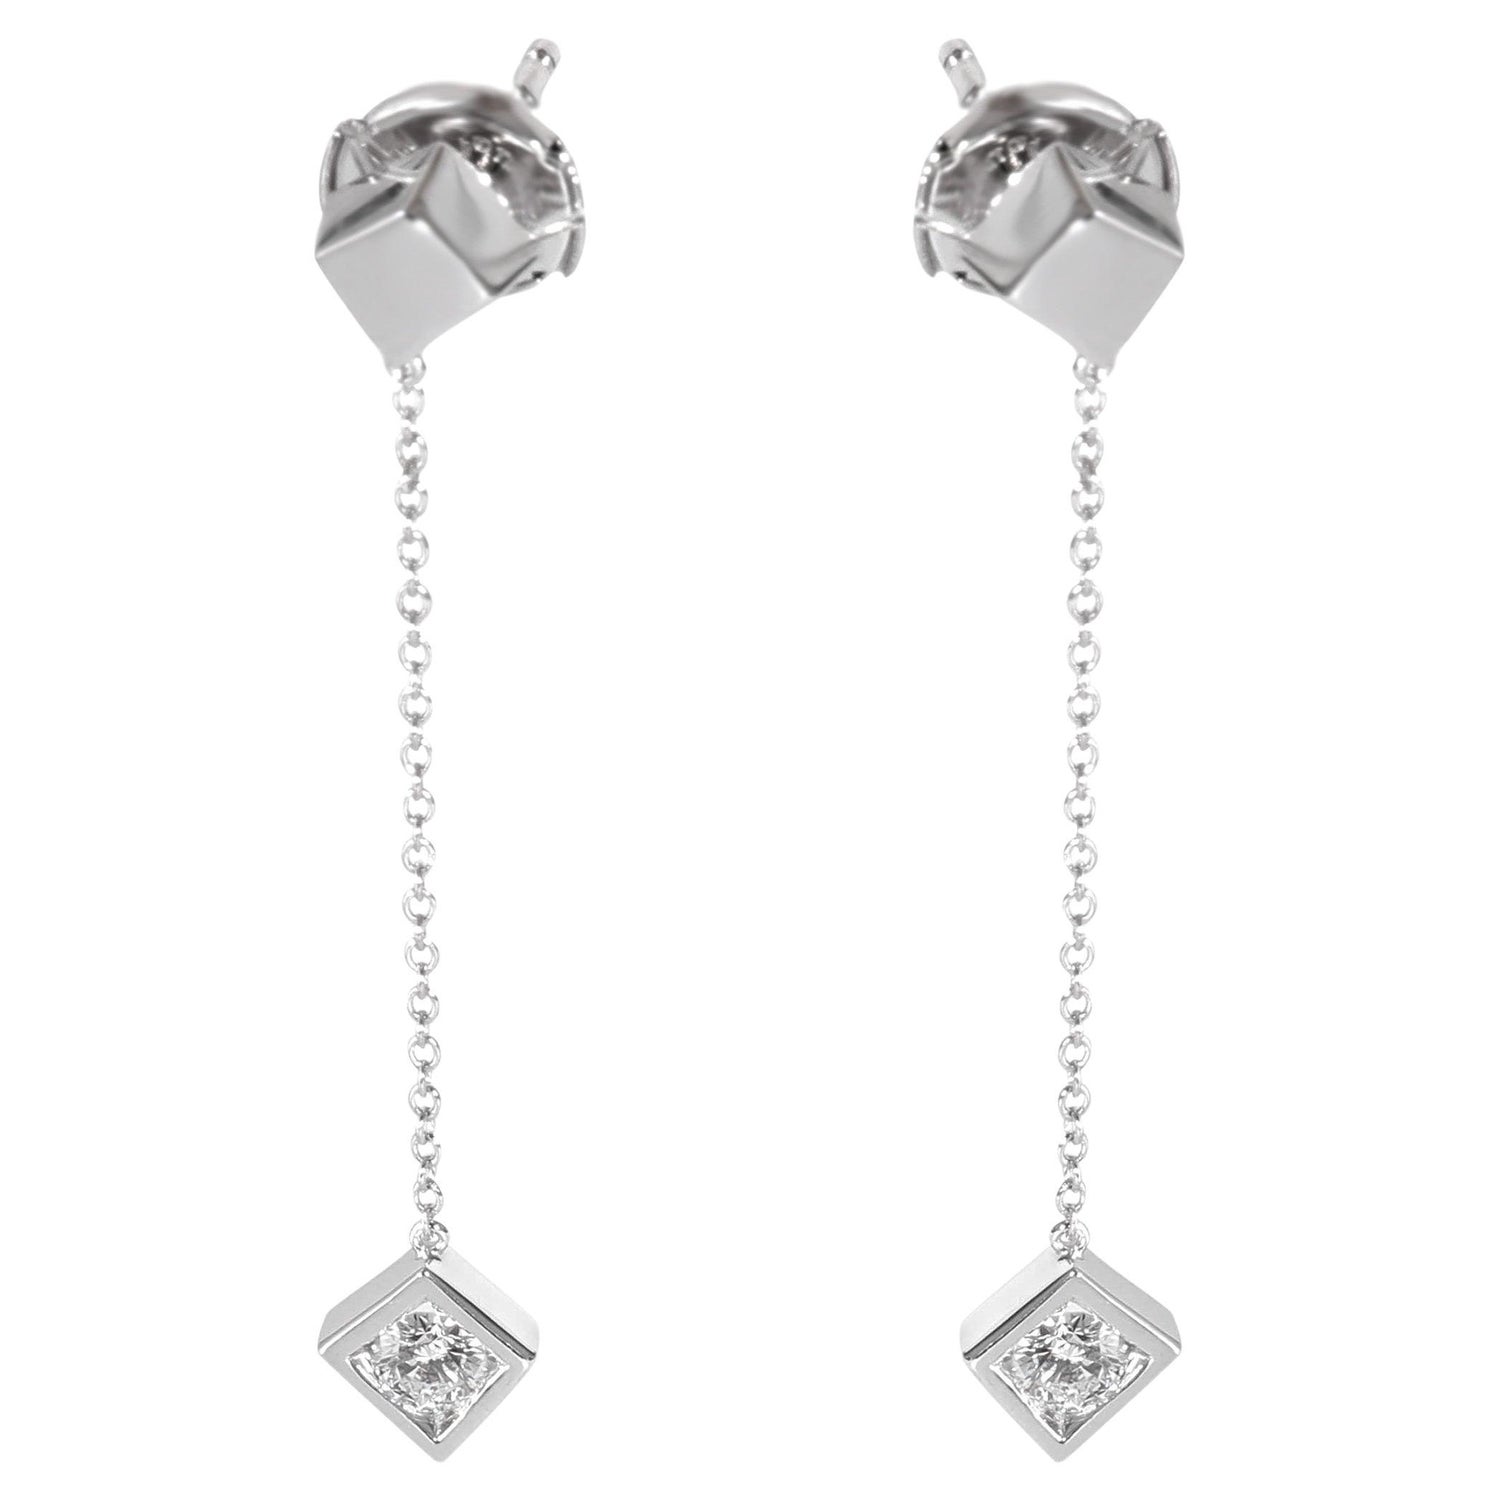 Louis Vuitton dentelle Earrings in 18K White Gold 0.80 ctw - Earrings / White Gold | Pre-owned & Certified | used Second Hand | Womens